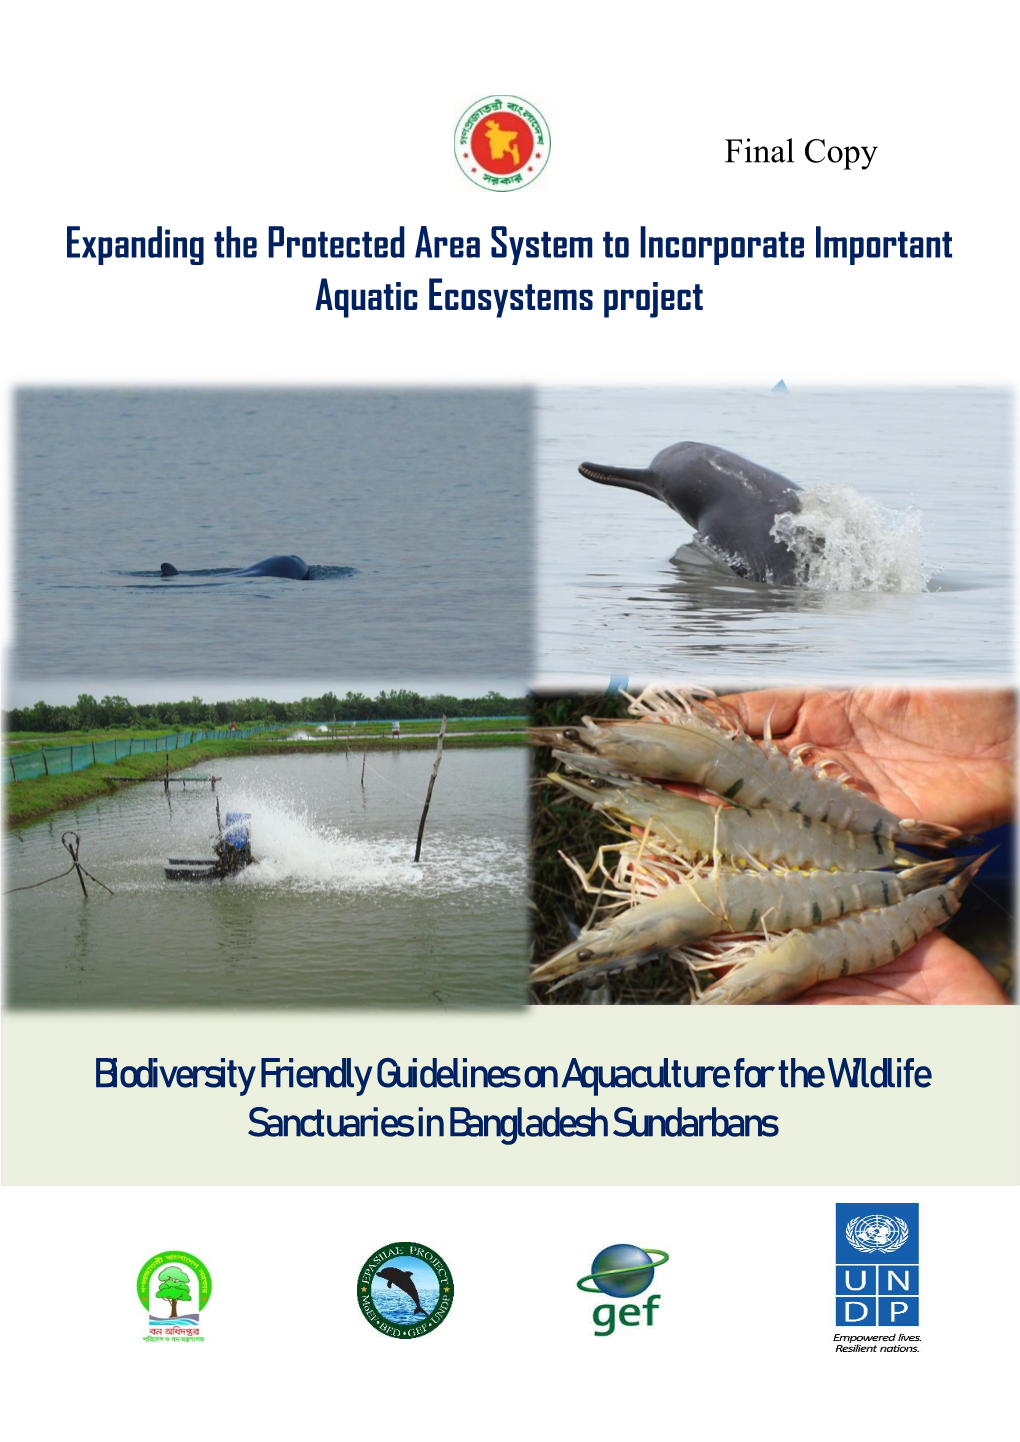 Expanding the Protected Area System to Incorporate Important Aquatic Ecosystems Project